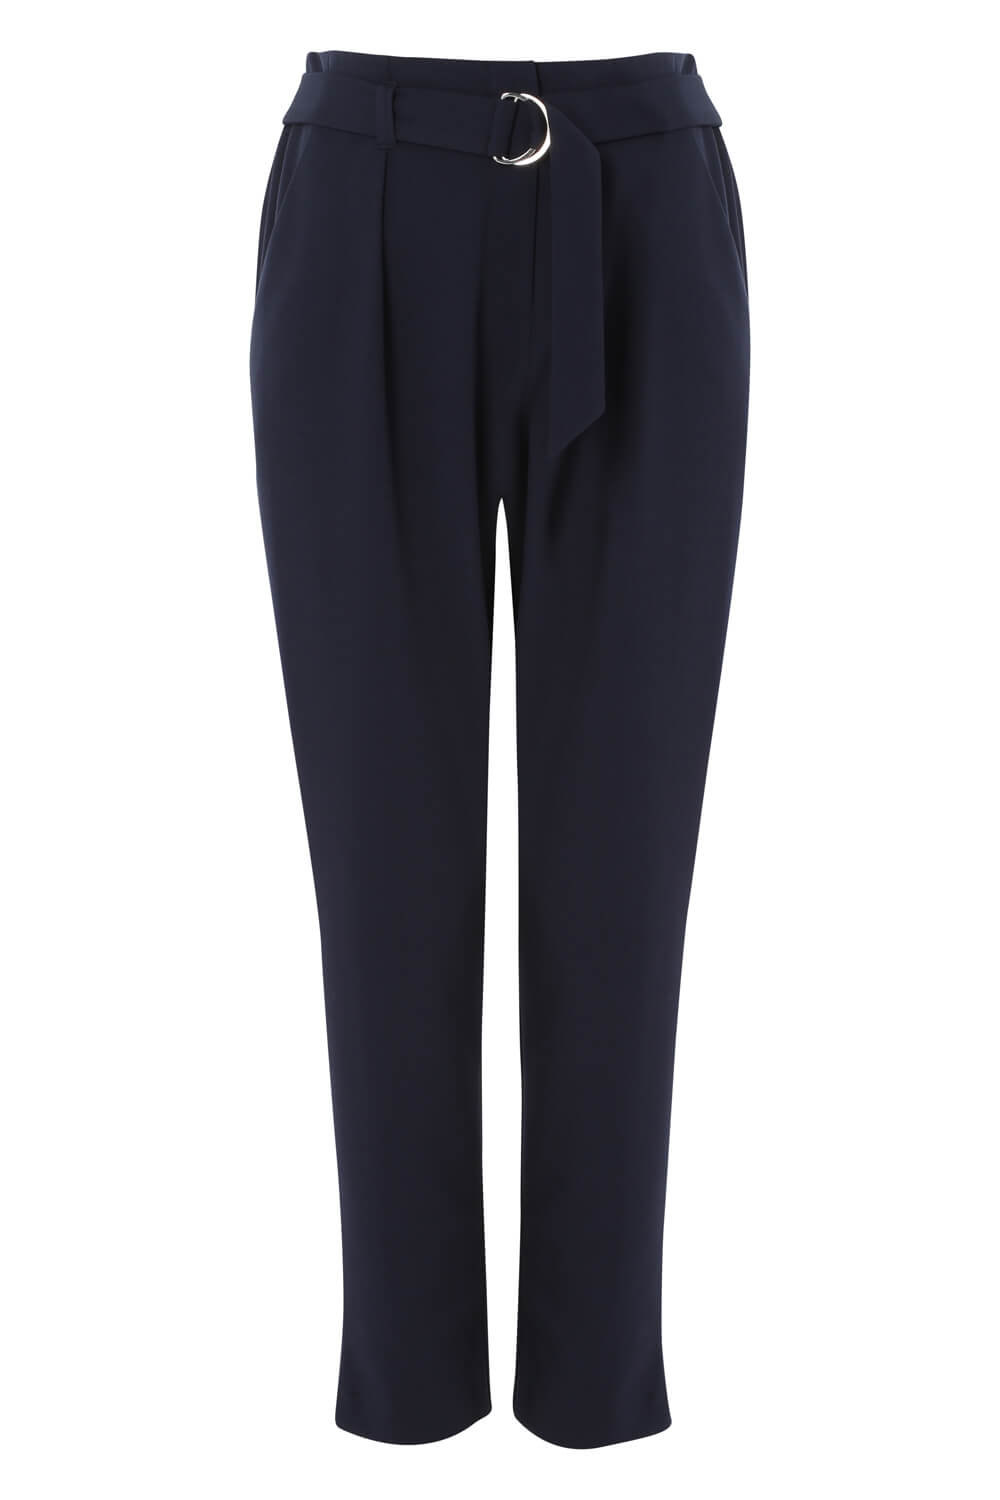 Navy  Ring Detail Tailored Trousers, Image 5 of 5